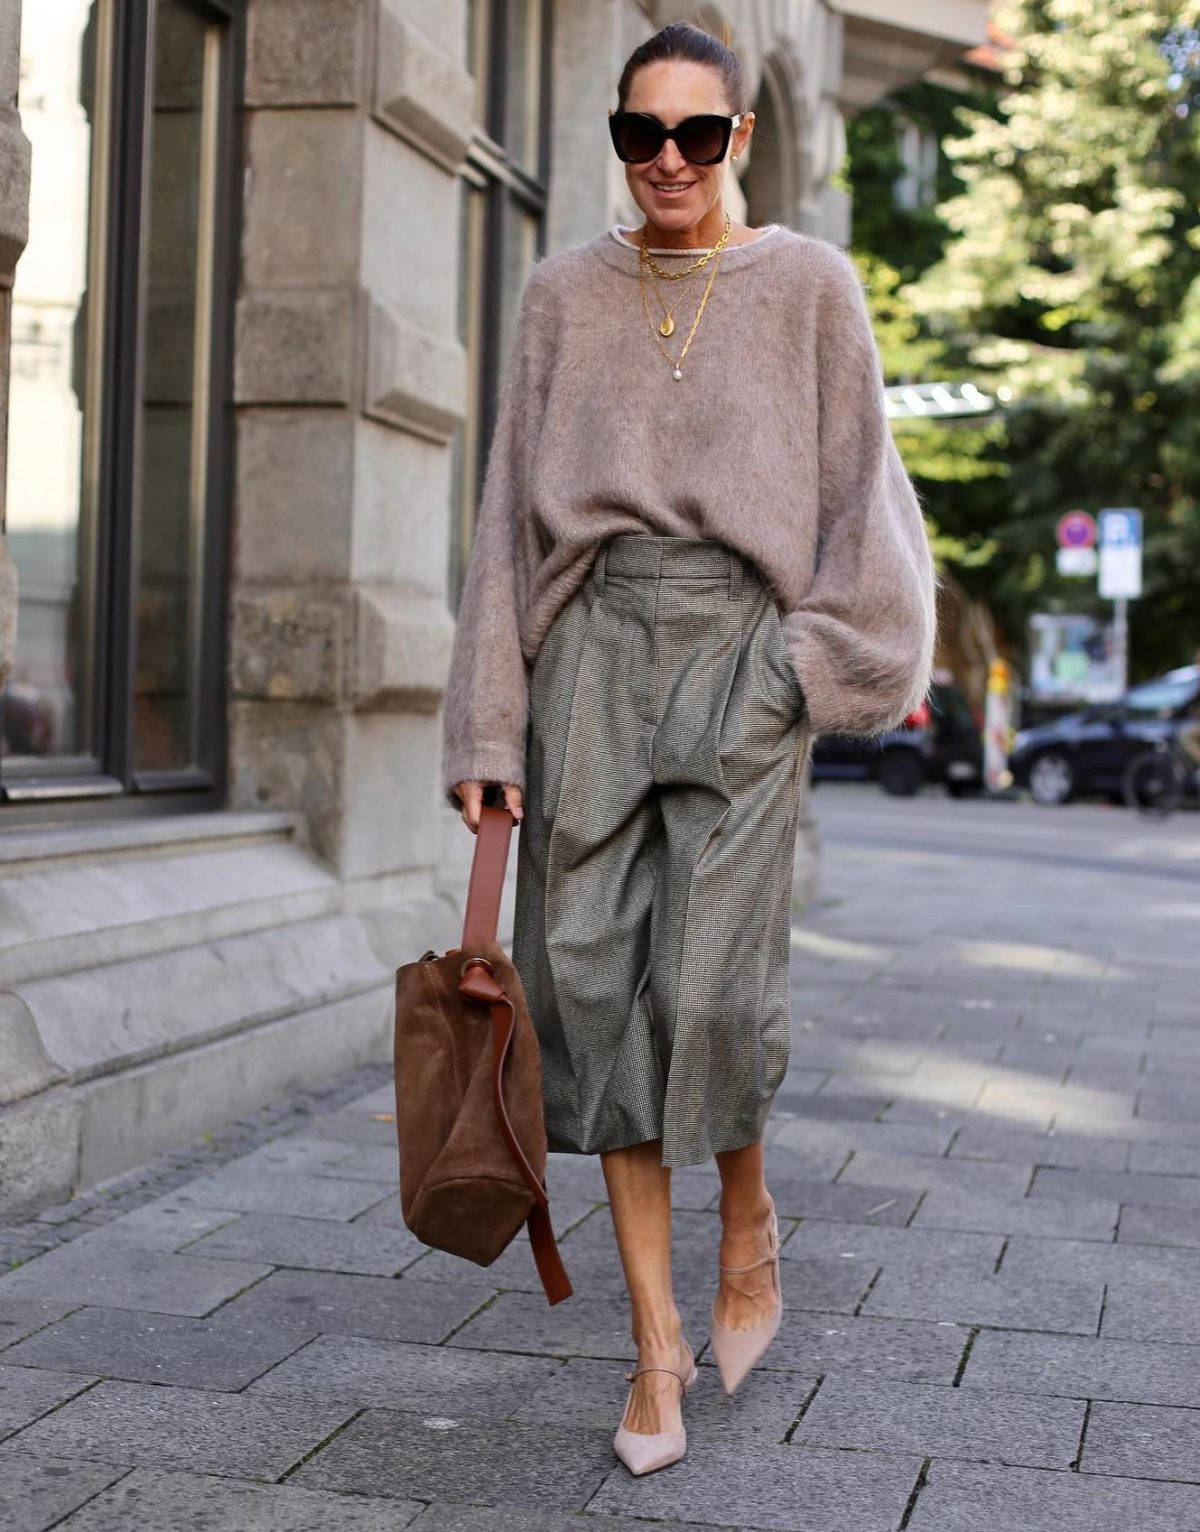 Cozy neutral outfit with grey culottes and a beige sweater.